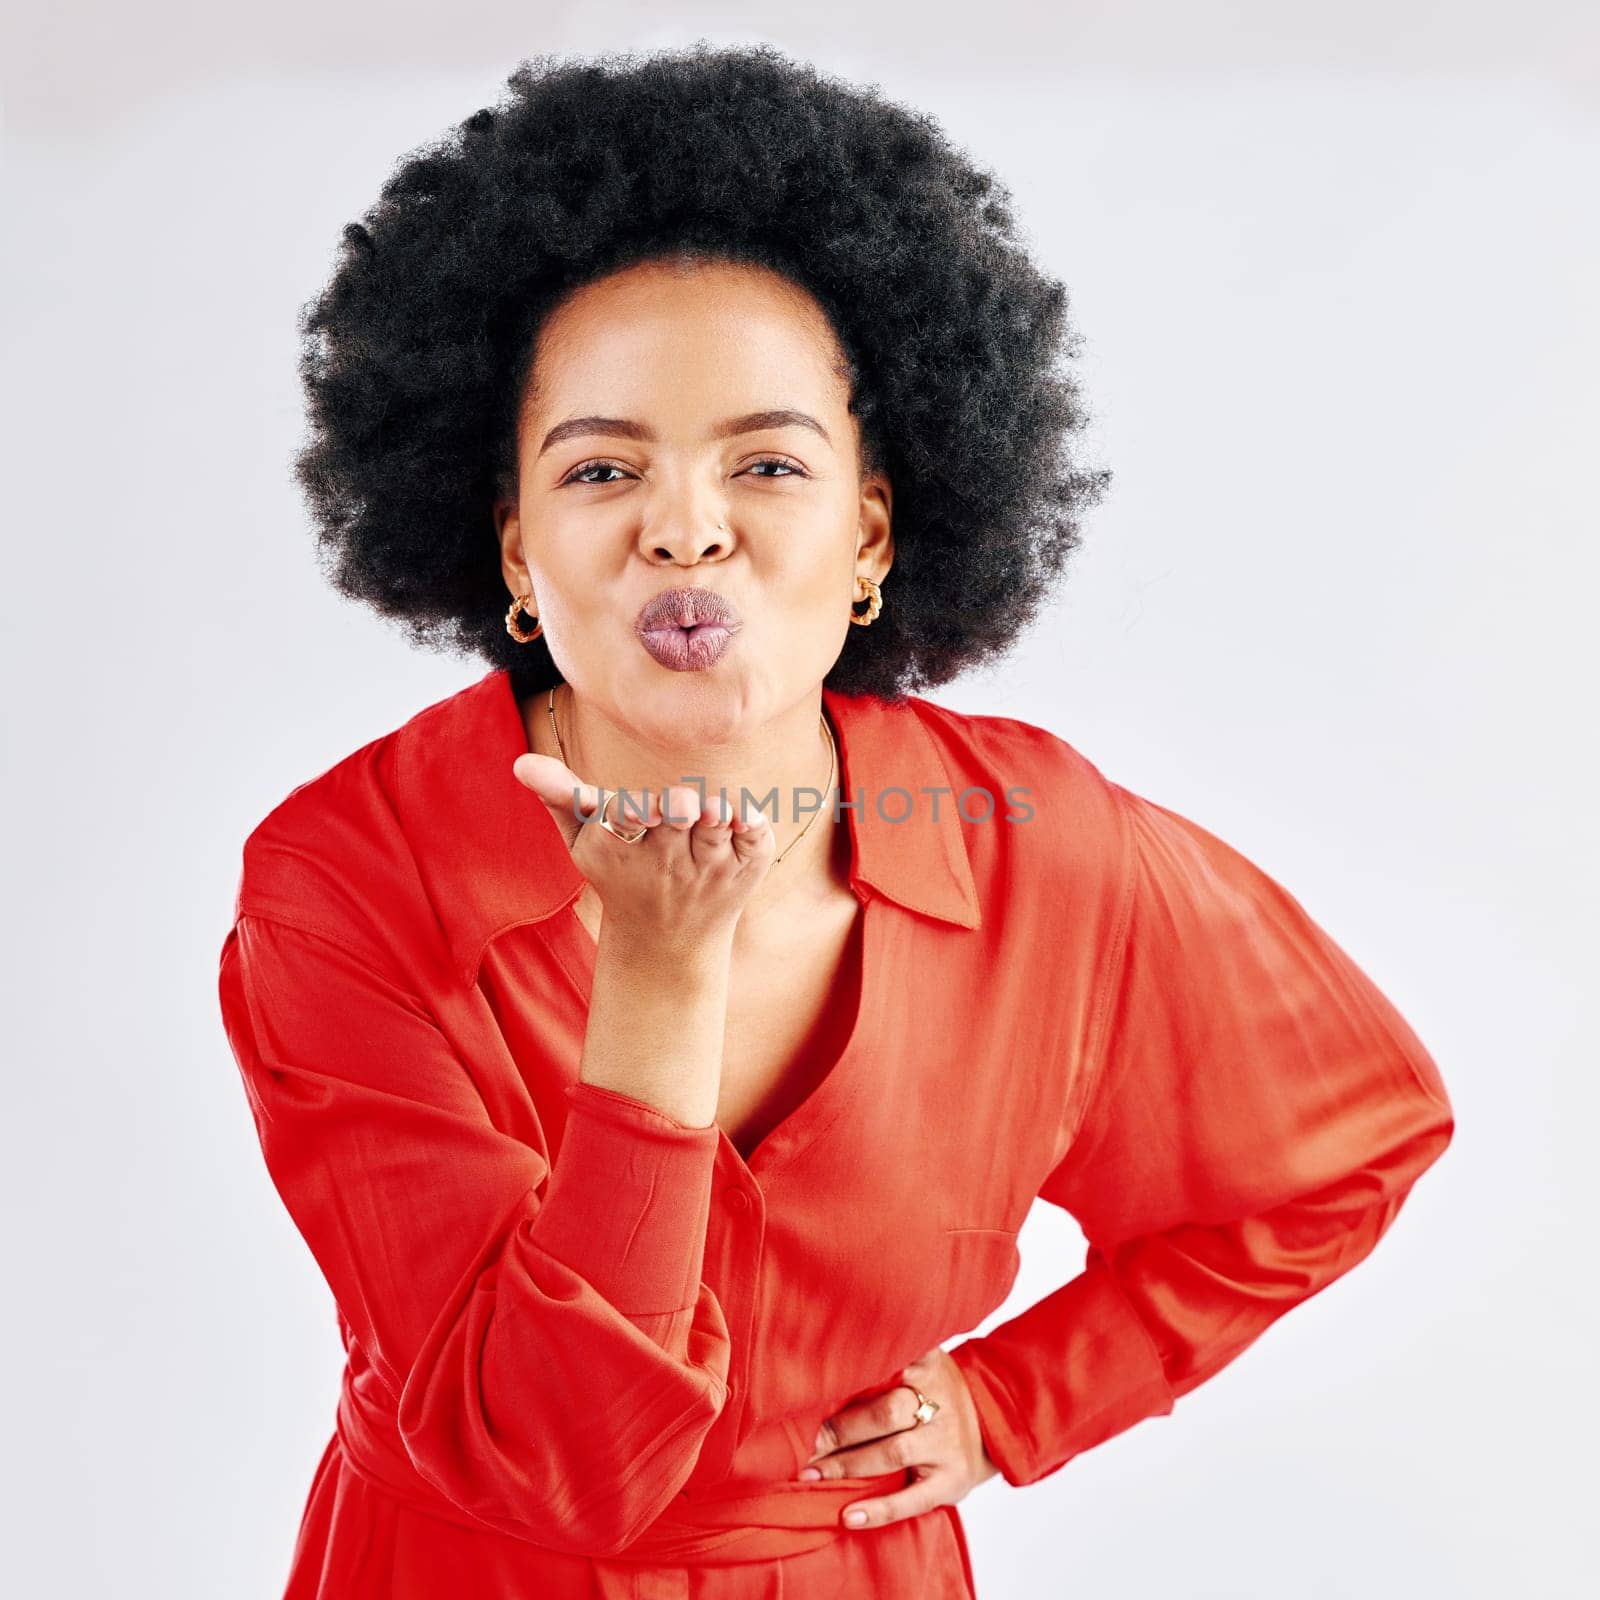 Happy, black woman and blowing a kiss for portrait of love, care and flirting in studio on white background. Emoji, kisses and face of girl with happiness, freedom and support for romantic gesture.